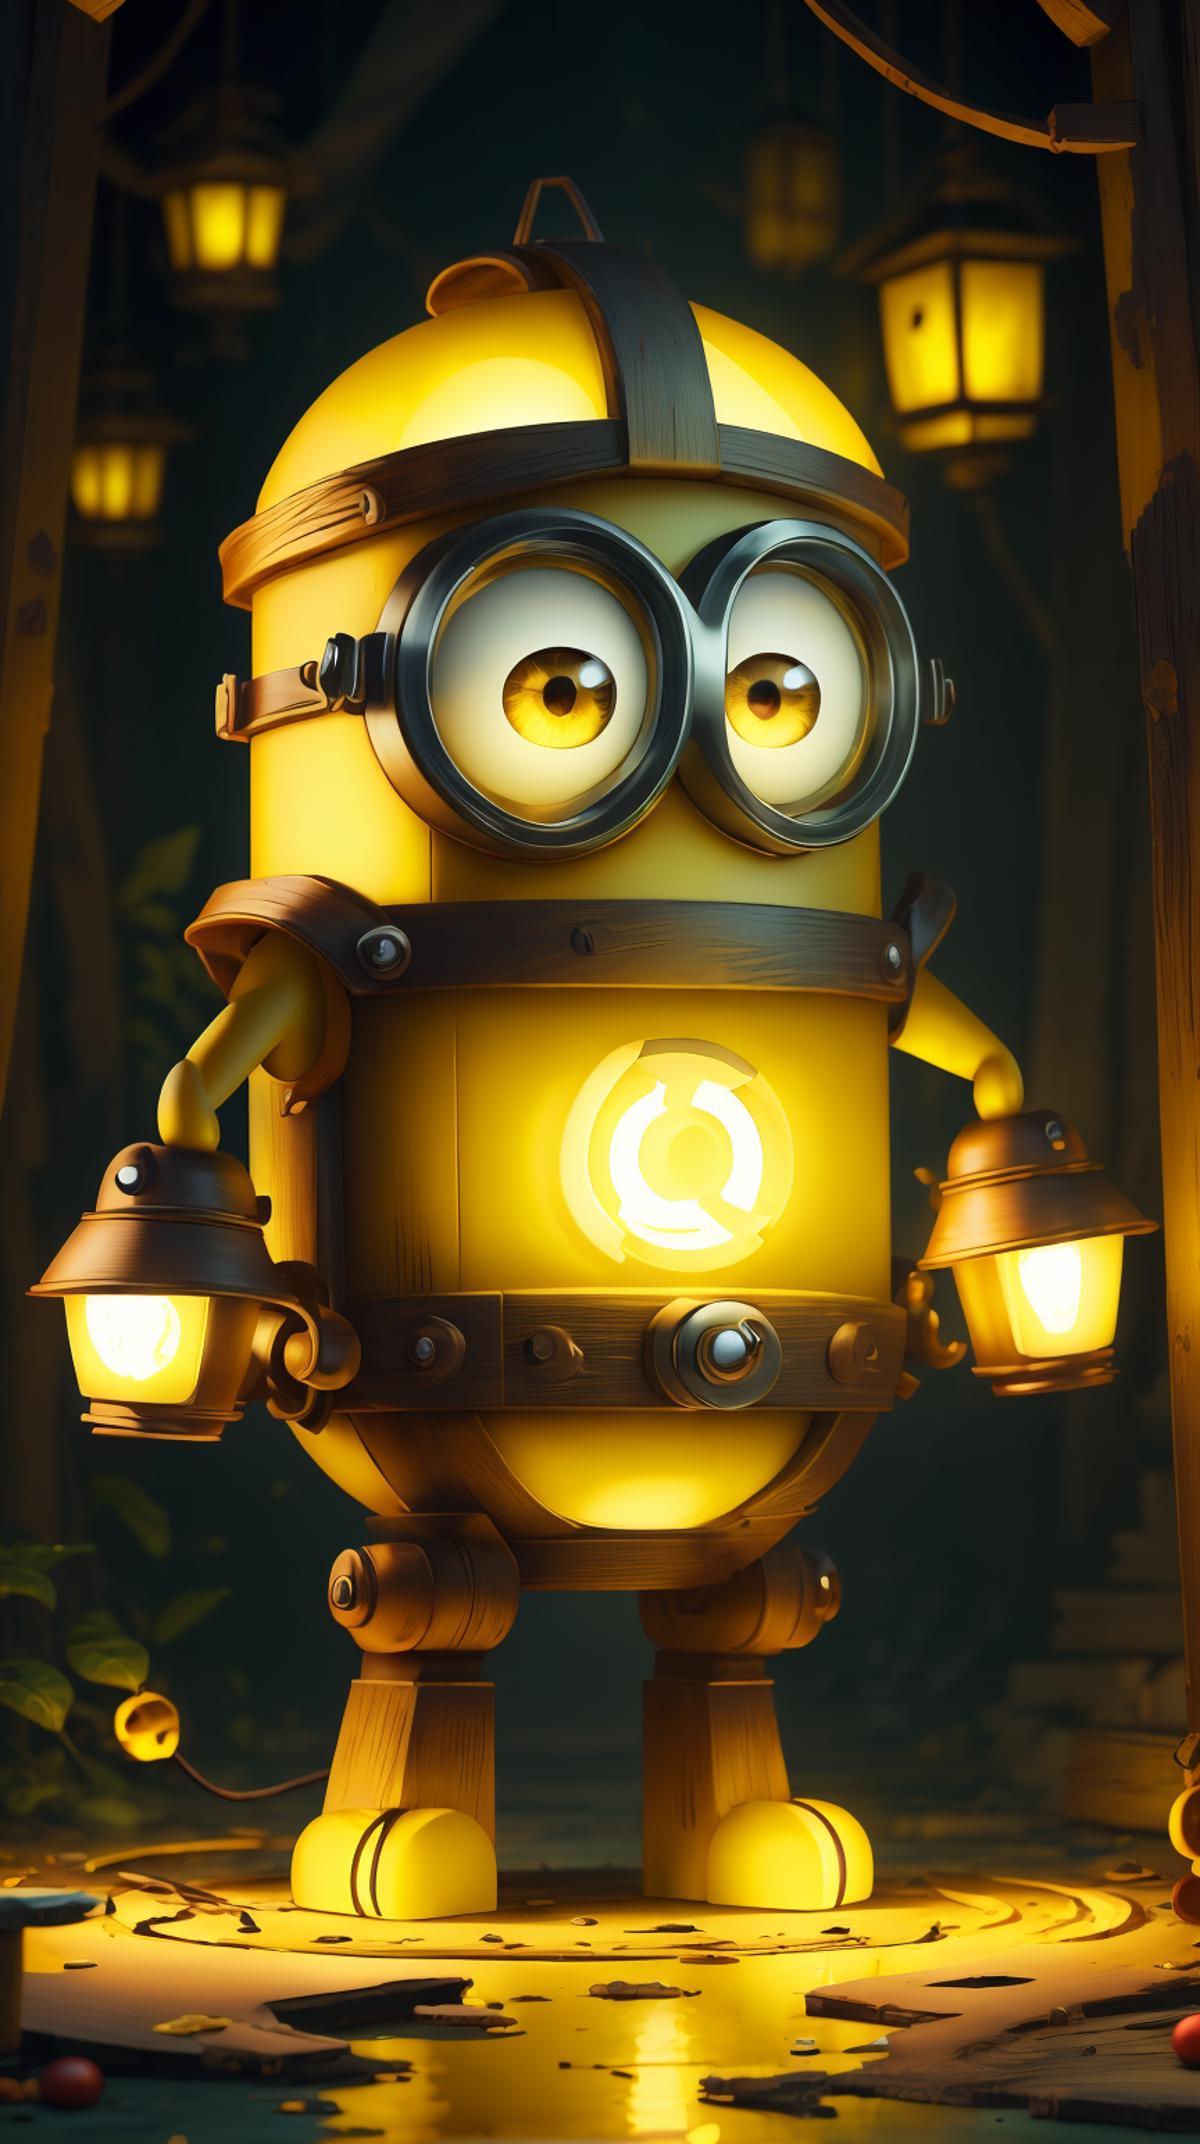 Minion Style - Make your own Minions! image by mnemic